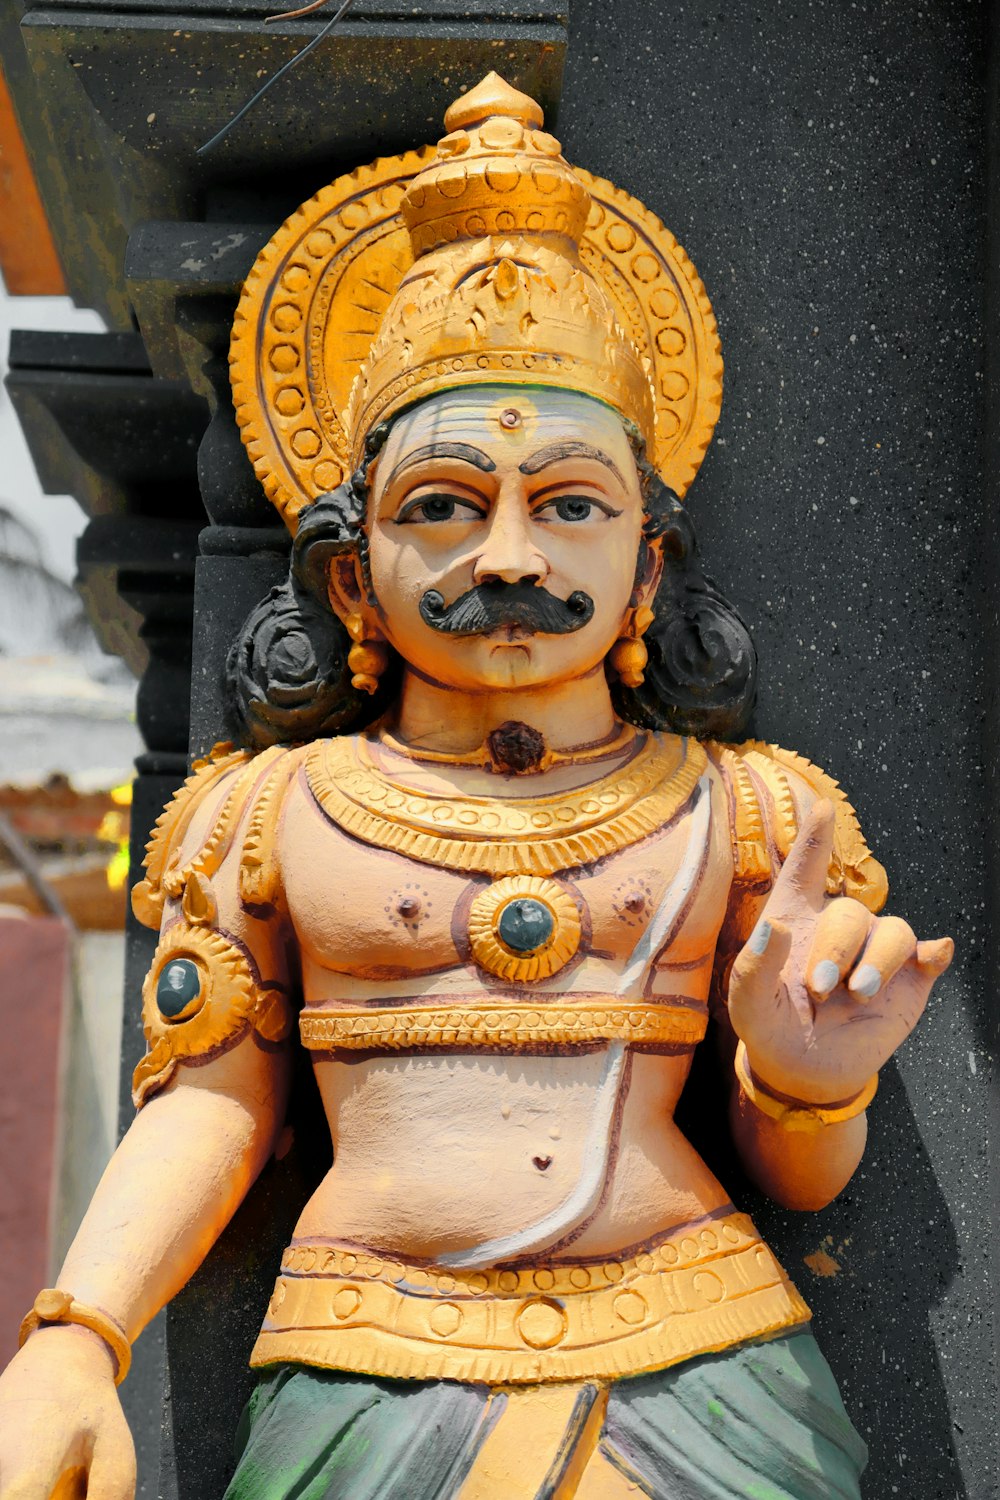 a statue of a man with a mustache and moustache